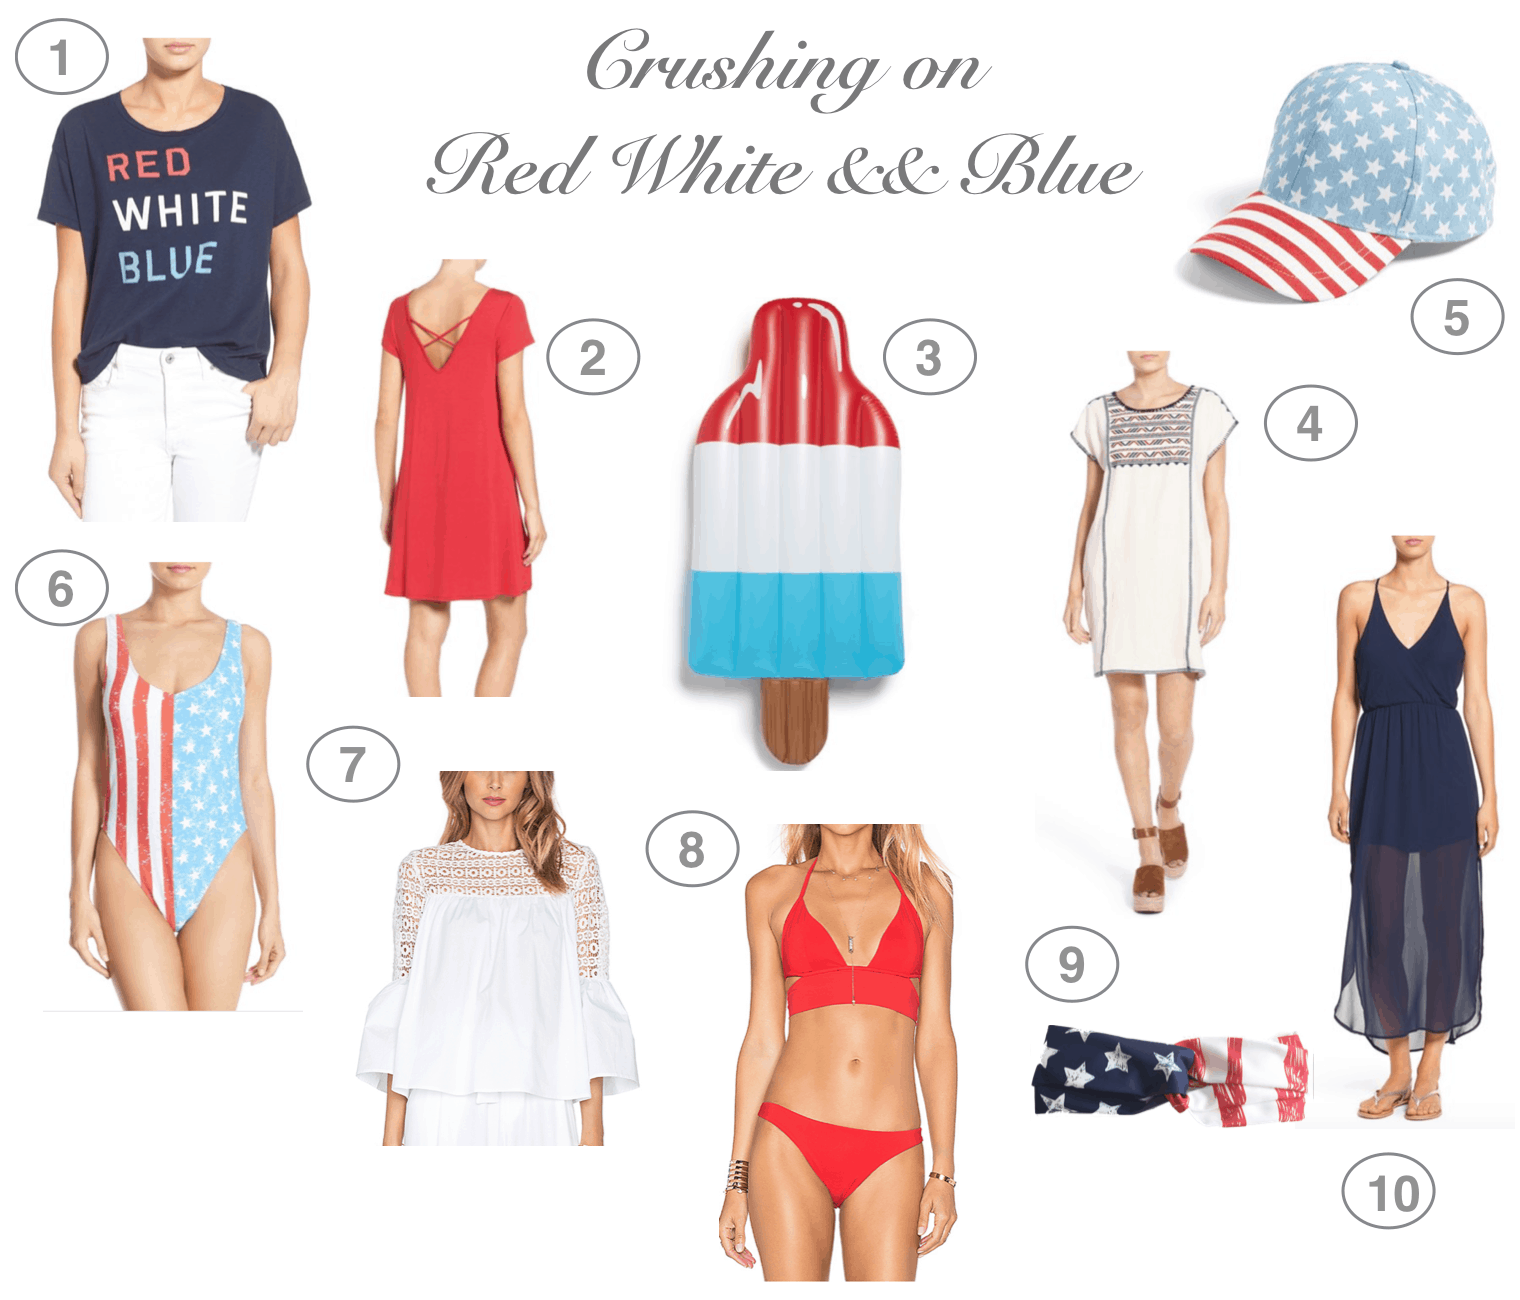 Dress Up Buttercup // A Houston-based fashion and inspiration blog developed to daily inspire your own personal style by Dede Raad | Crushing on Red White & Blue